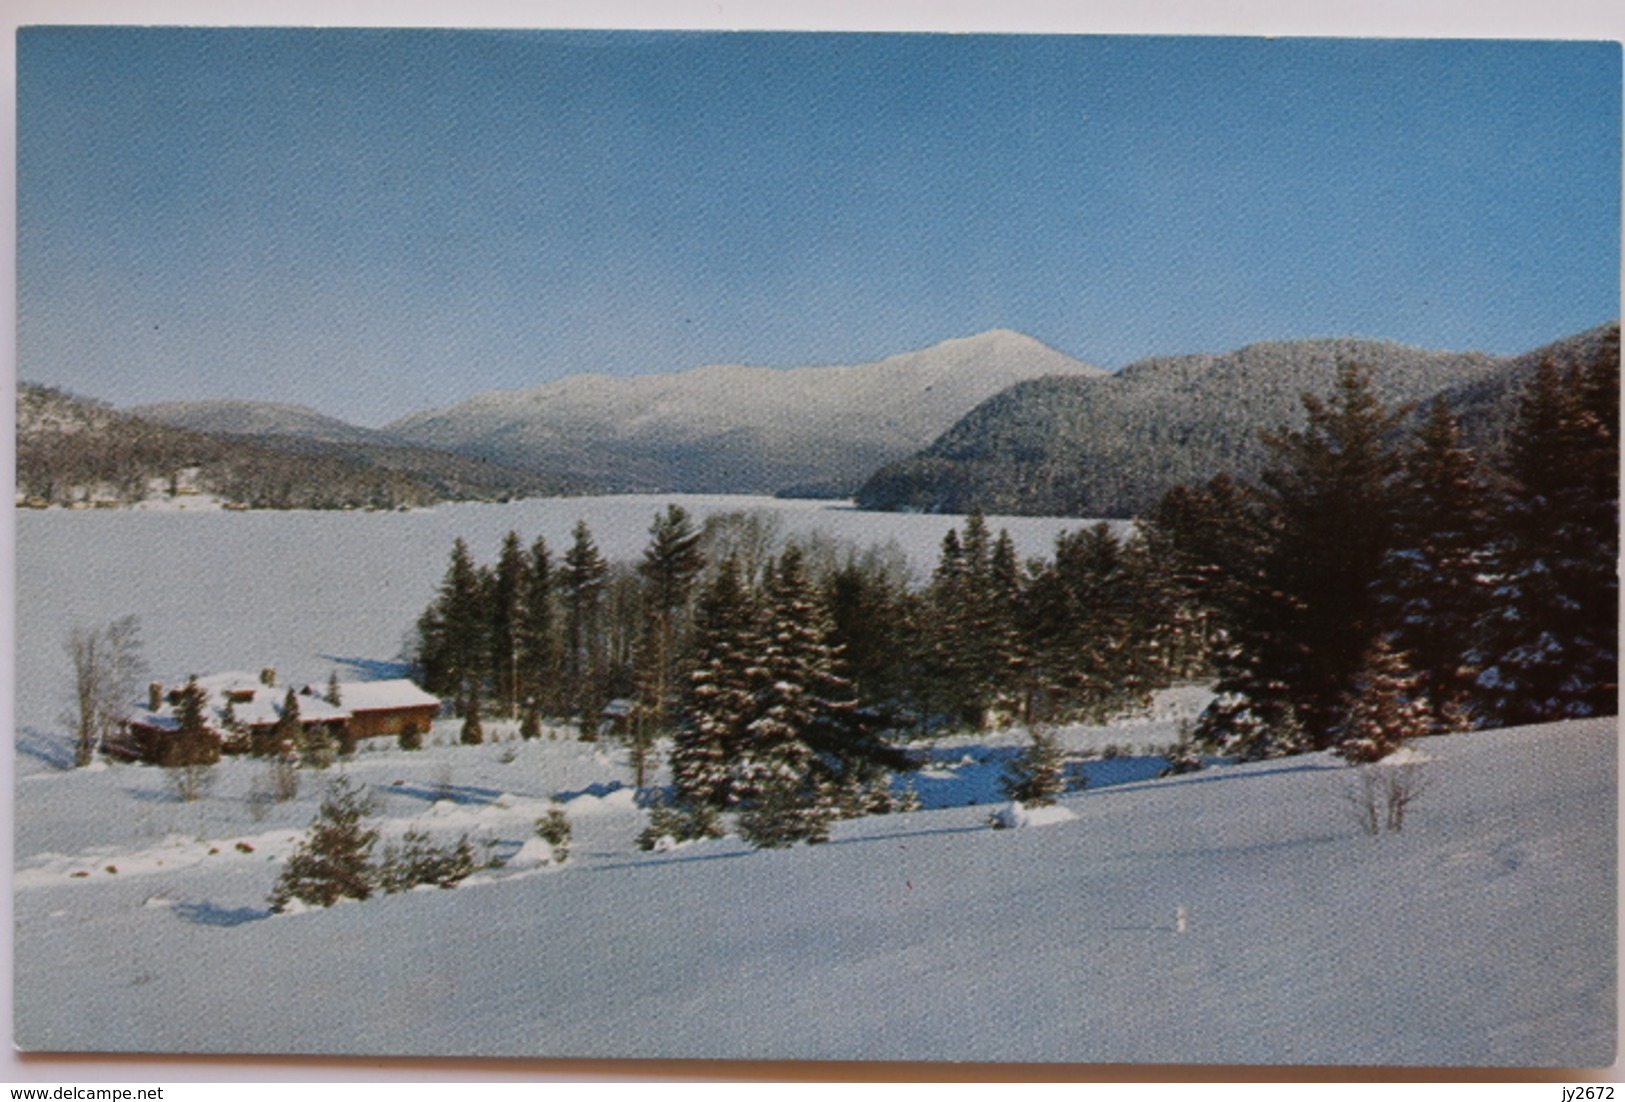 Lake Placid From Signal Hill - Lake George